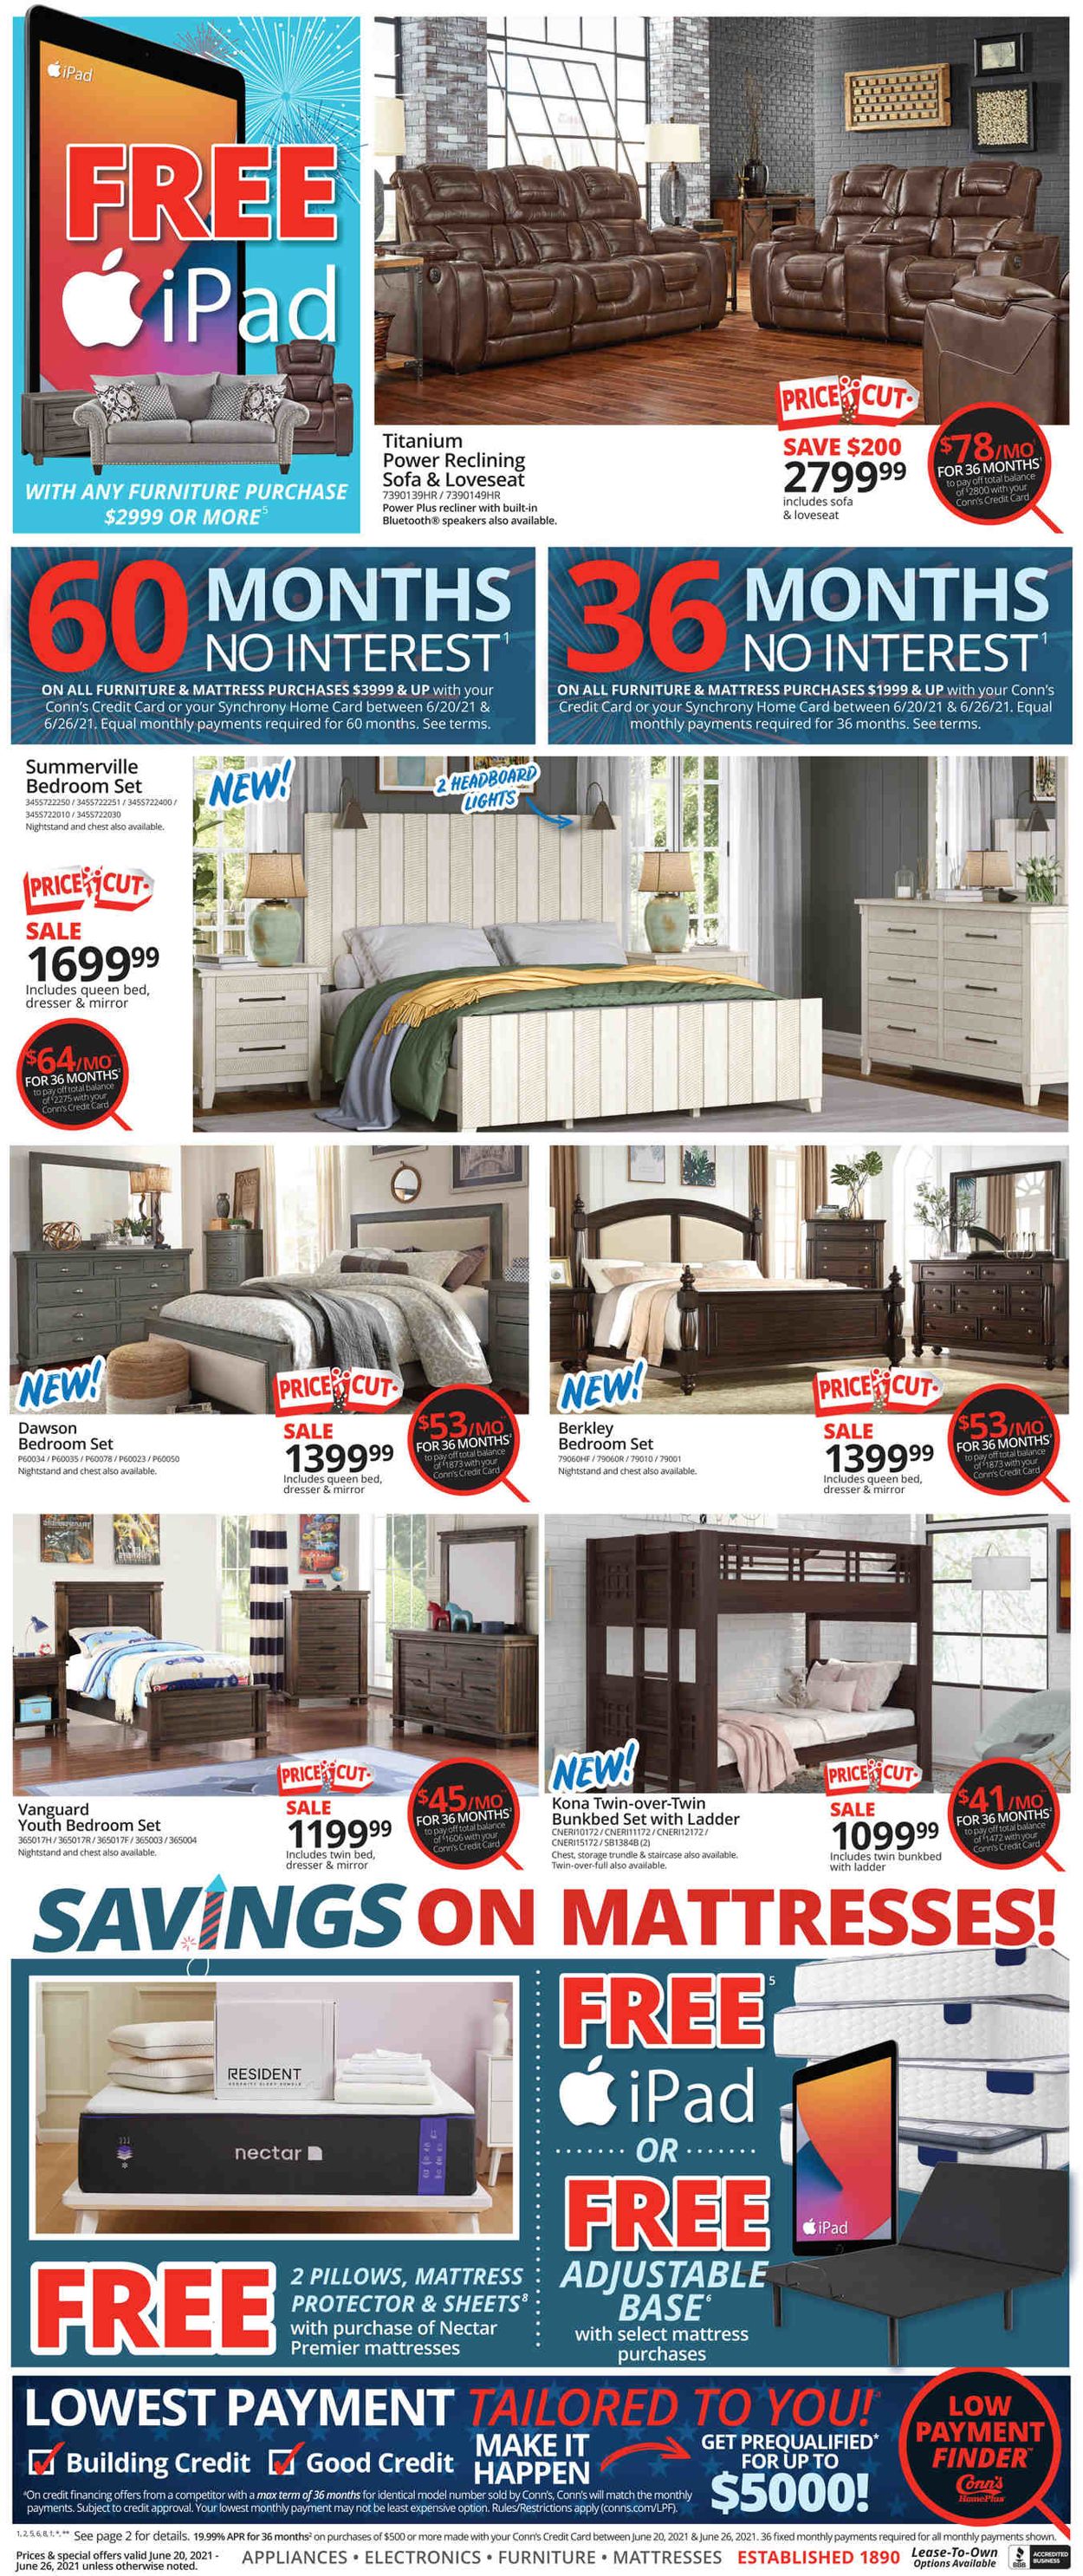 Conn's Home Plus Weekly Ad Circular - valid 06/20-06/26/2021 (Page 4)